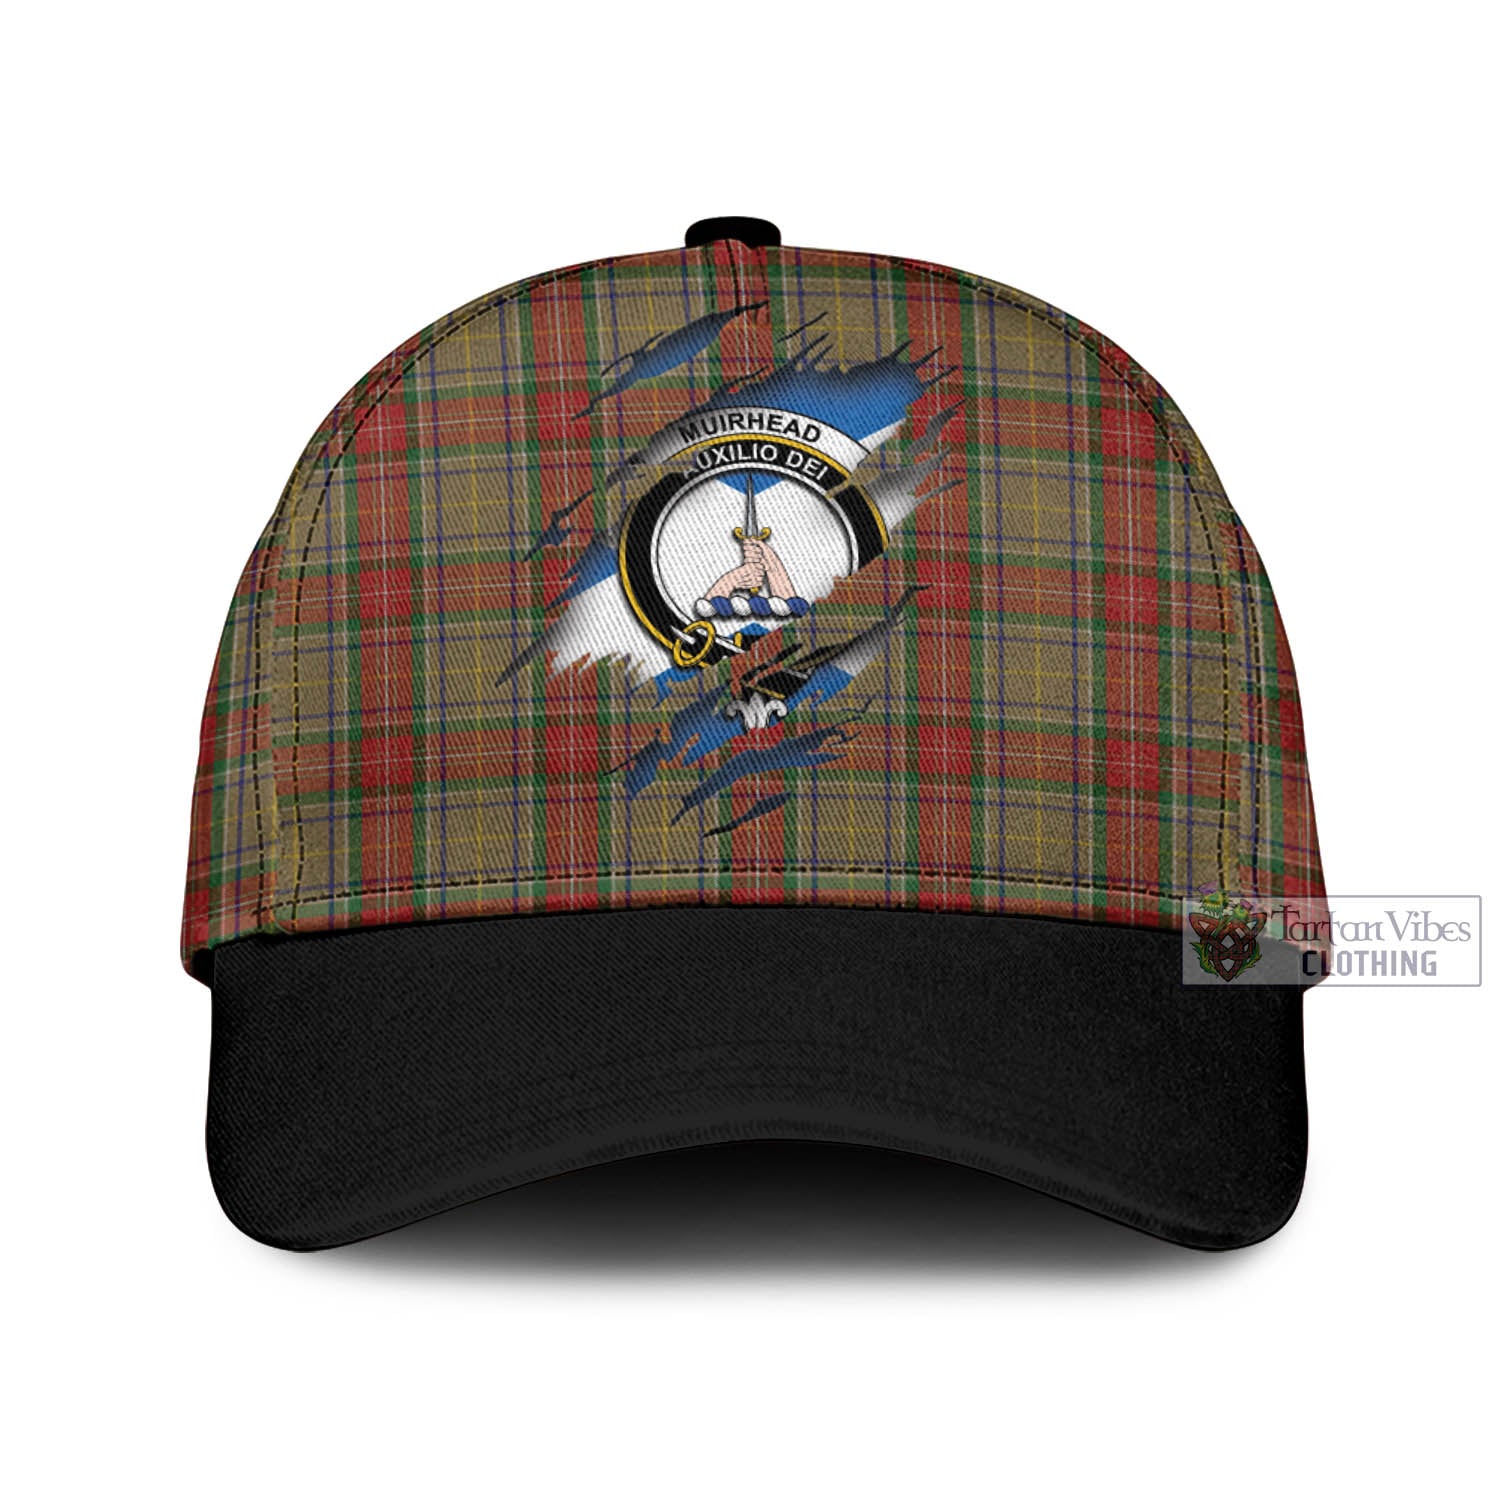 Tartan Vibes Clothing Muirhead Old Tartan Classic Cap with Family Crest In Me Style